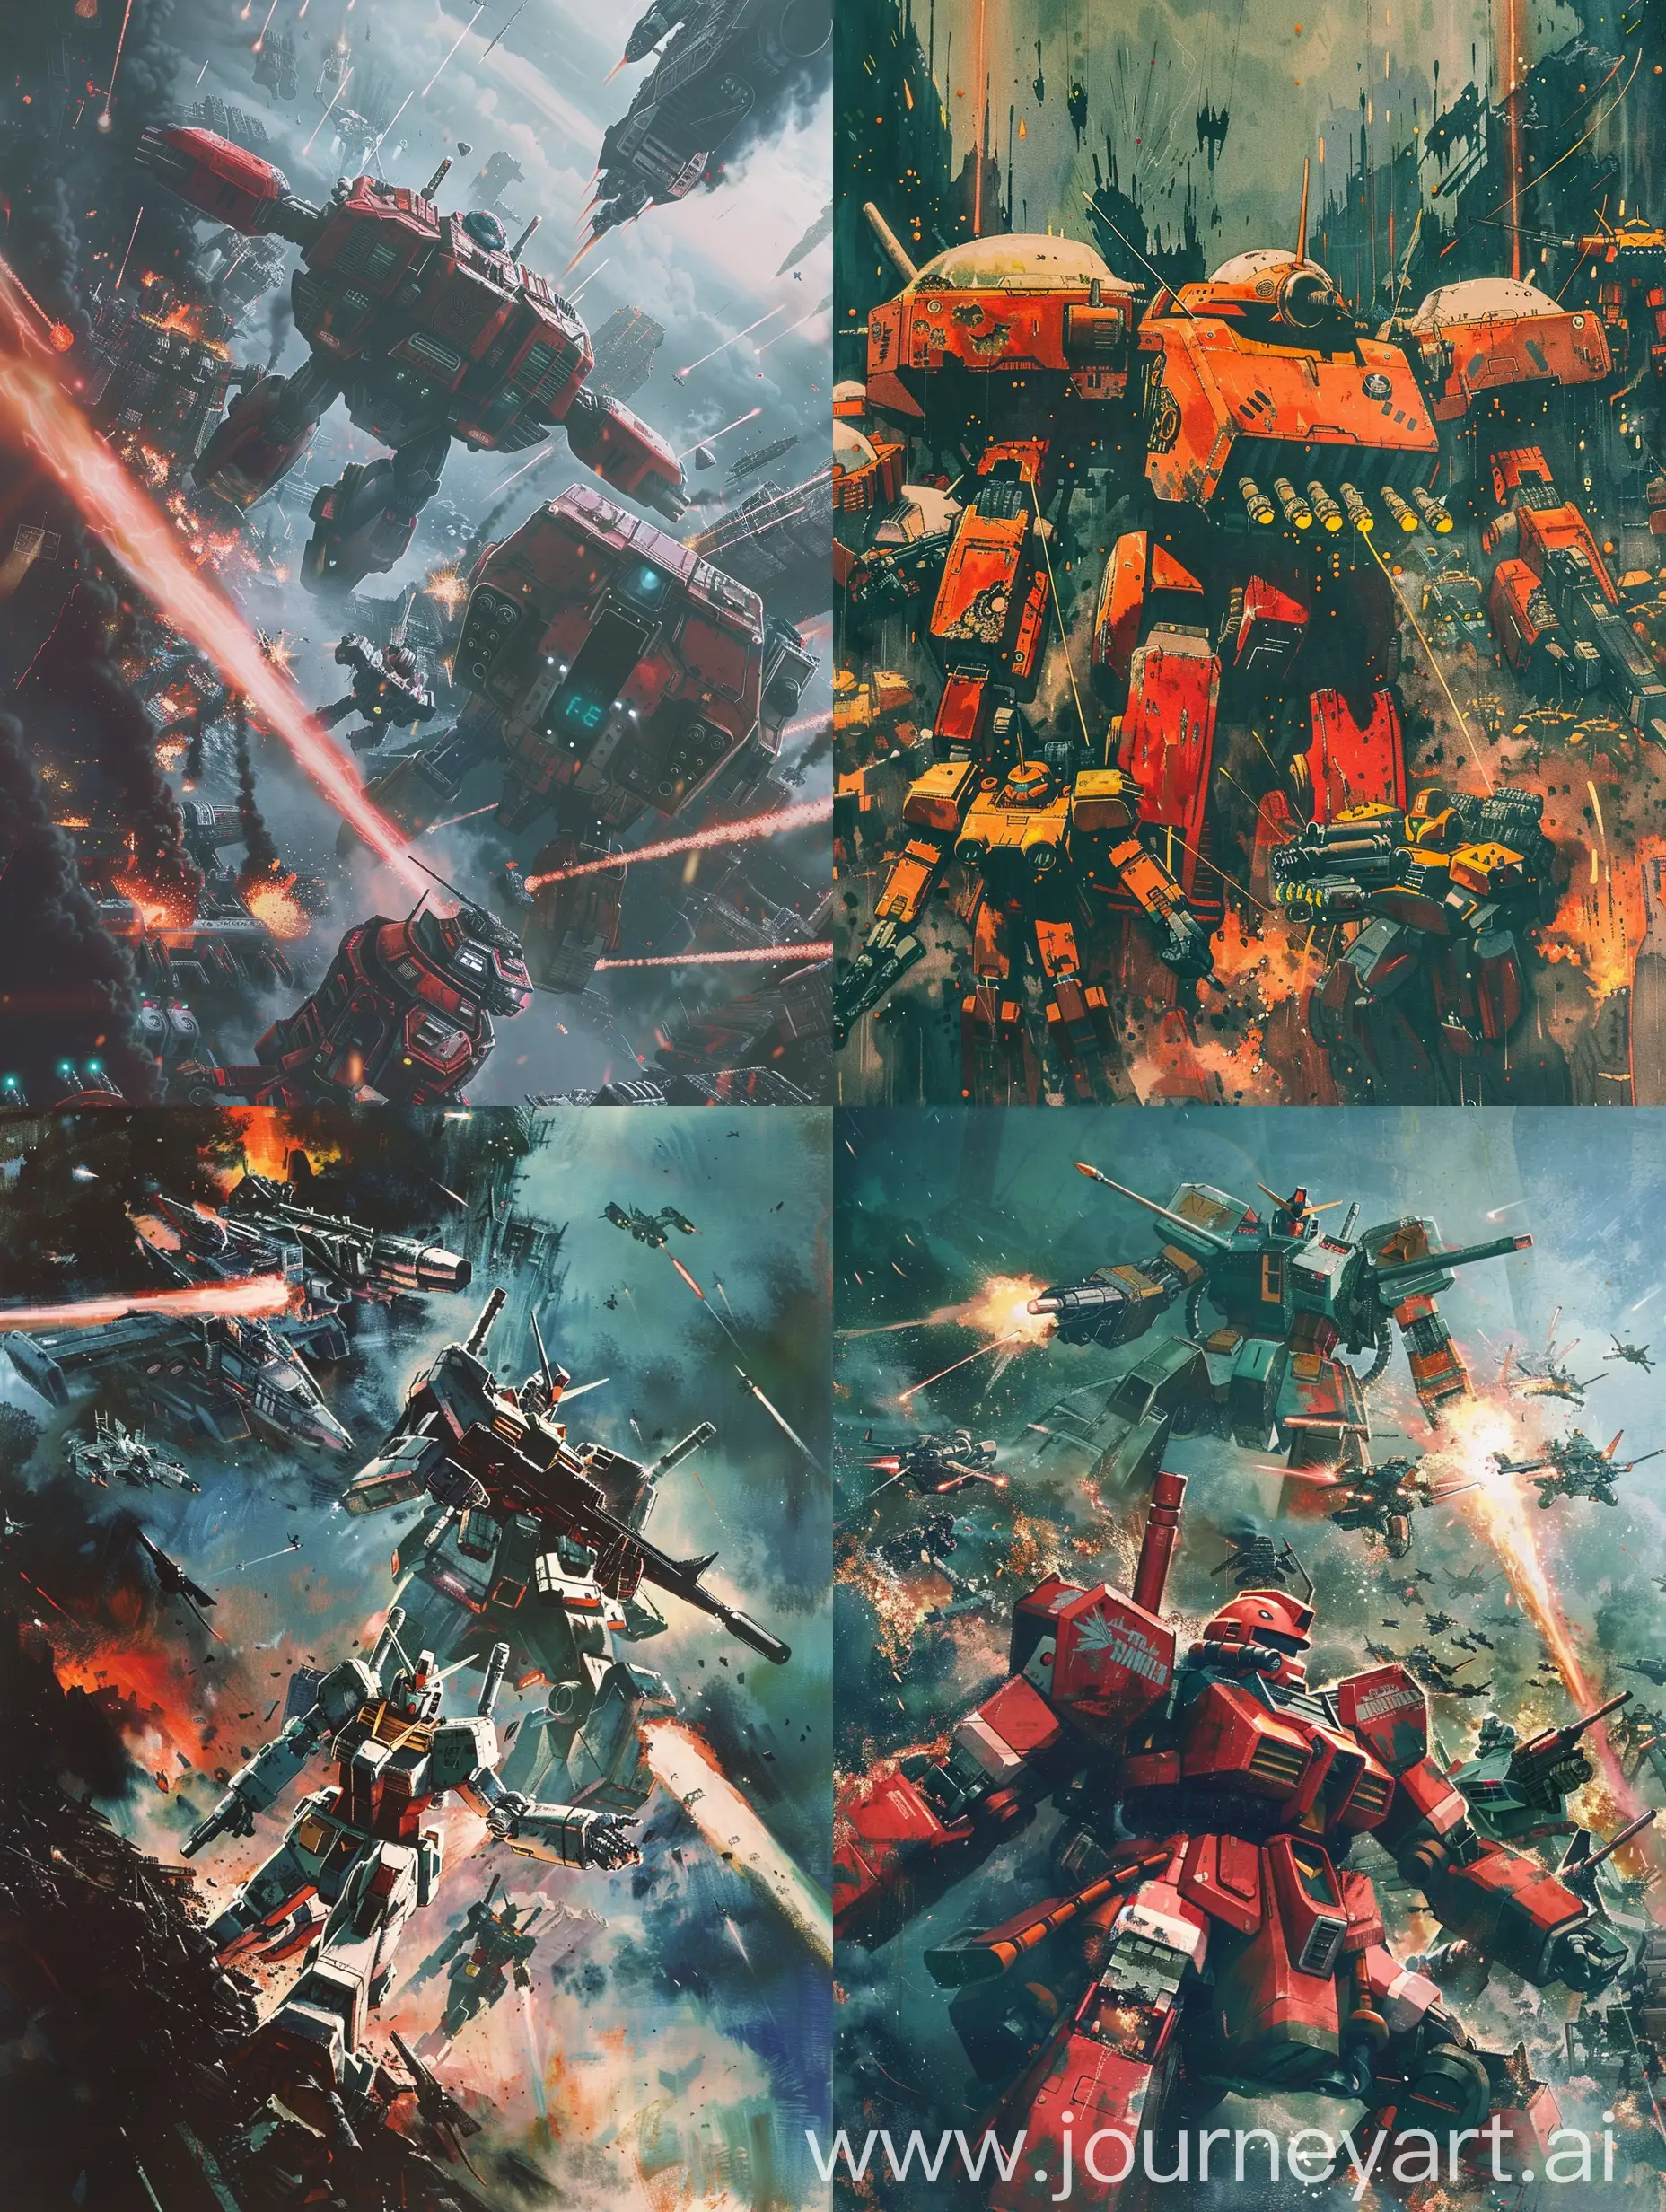 1980s anime cartoon scene of
steampunk gundam mechs. Vibrant, saturated
environment colors are met with a stark contrast of
monochrome robots. The battle is chaotic and
intense, gun fire creates fear in the air full hair,  , , , front view, 